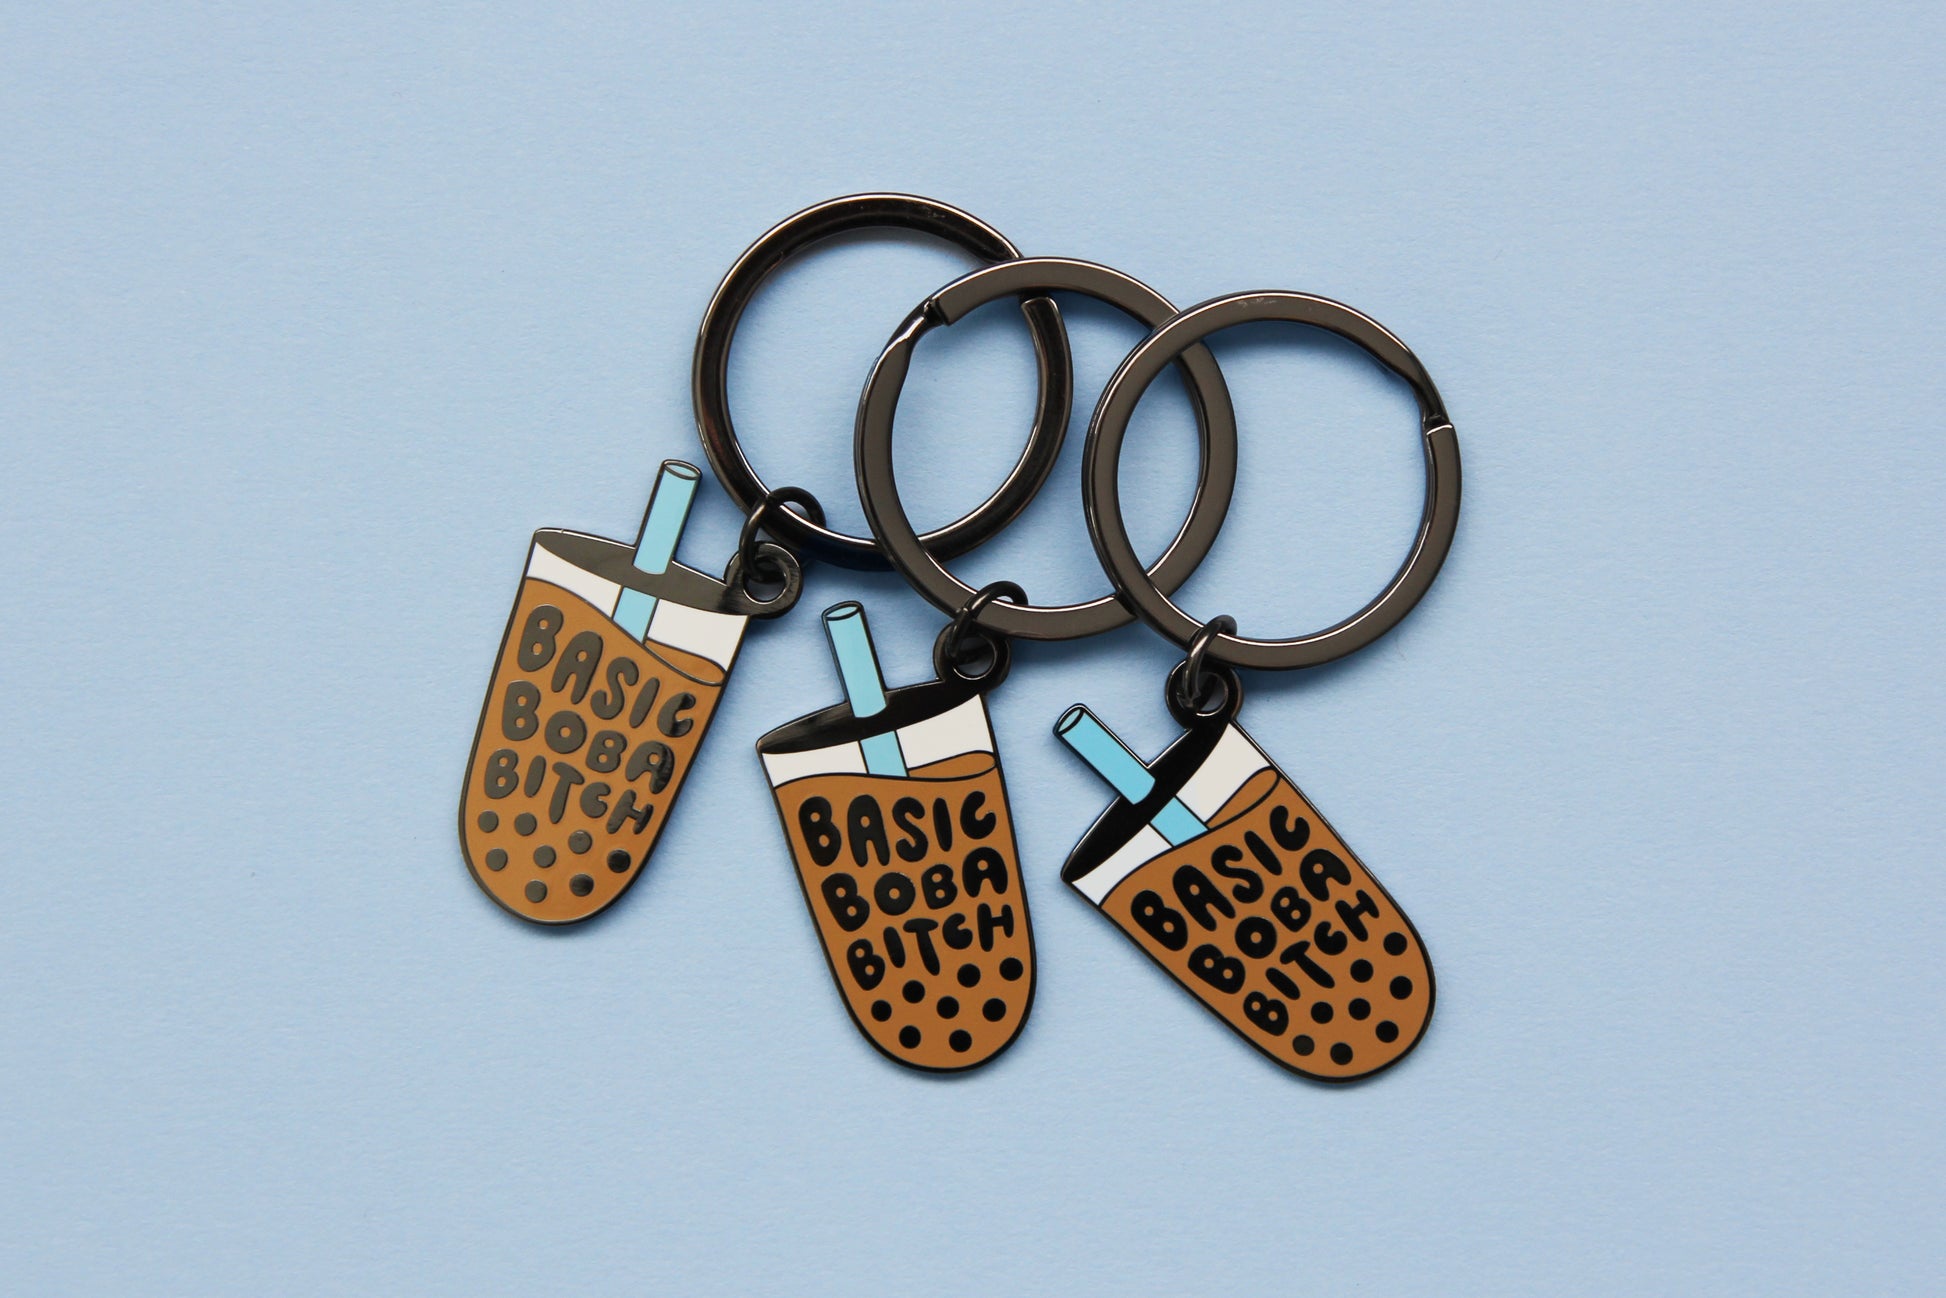 3 enamel keychains showing a cup of boba that says "Basic Boba Bitch" with a blue straw over a blue background.